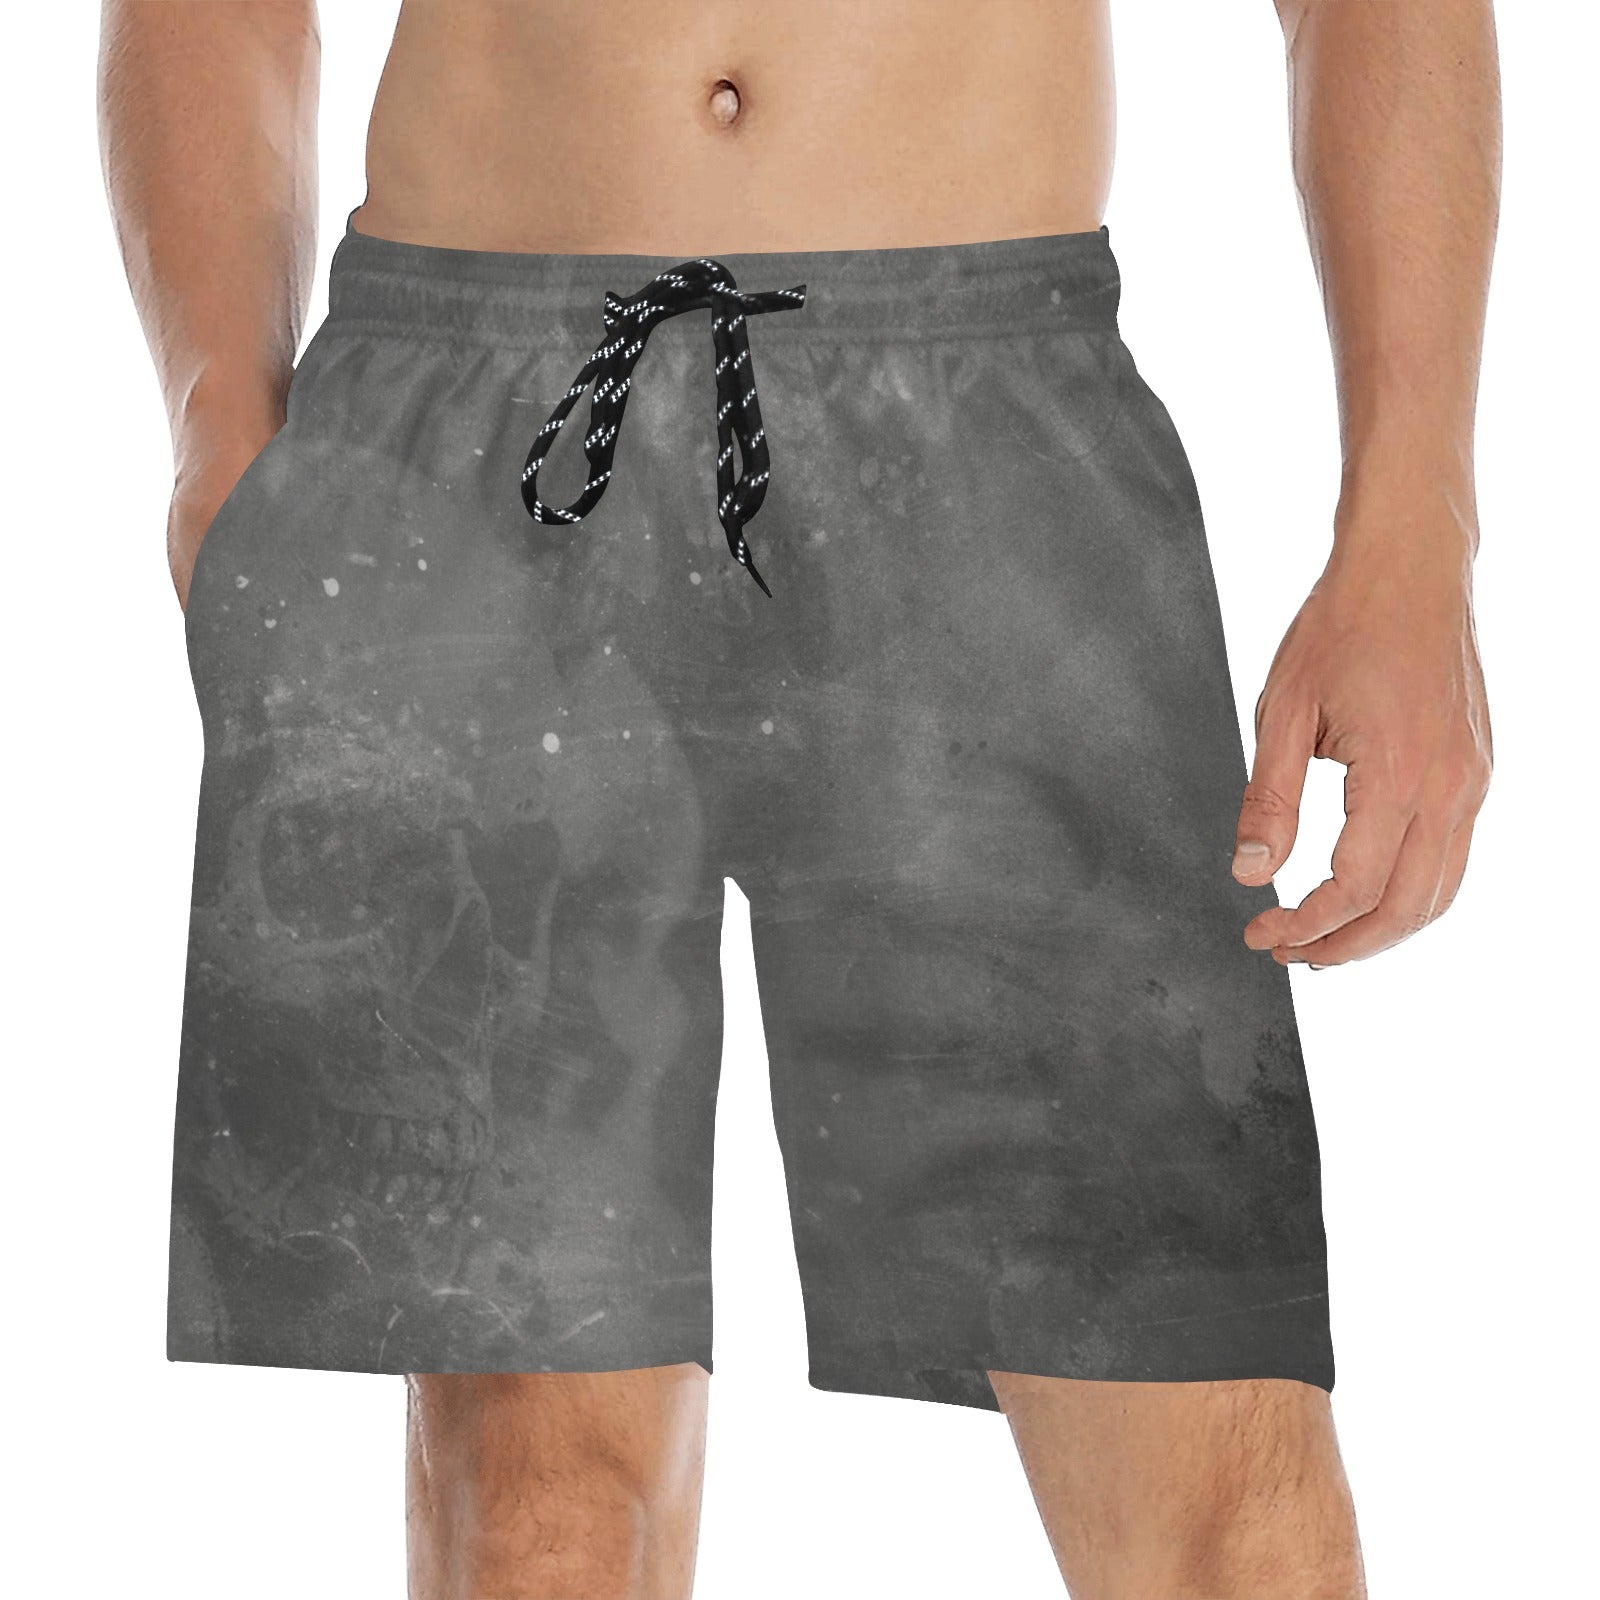 Faded Skull And Hands Beach Shorts